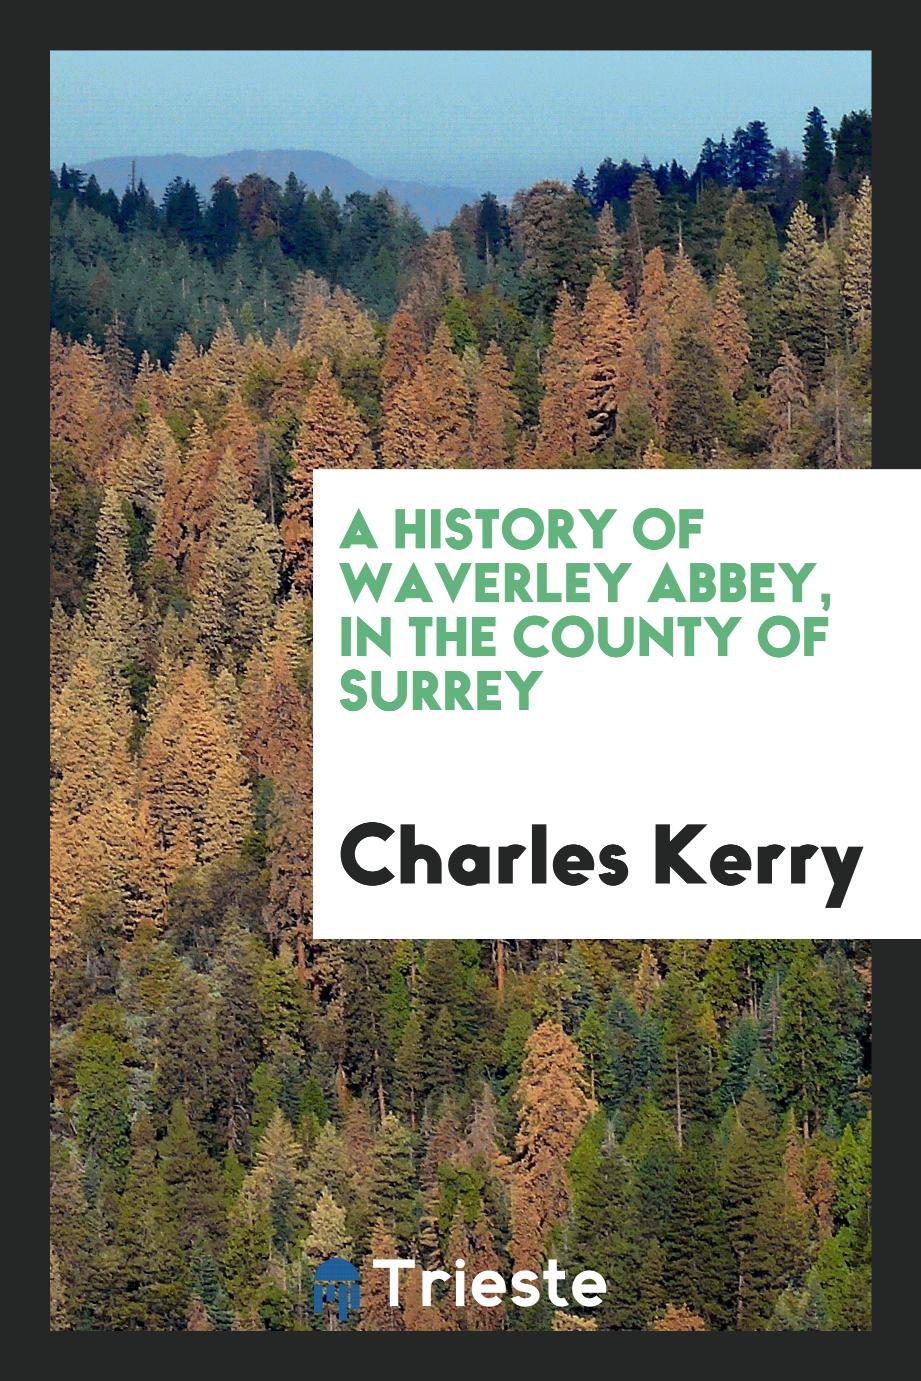 A History of Waverley Abbey, in the County of Surrey